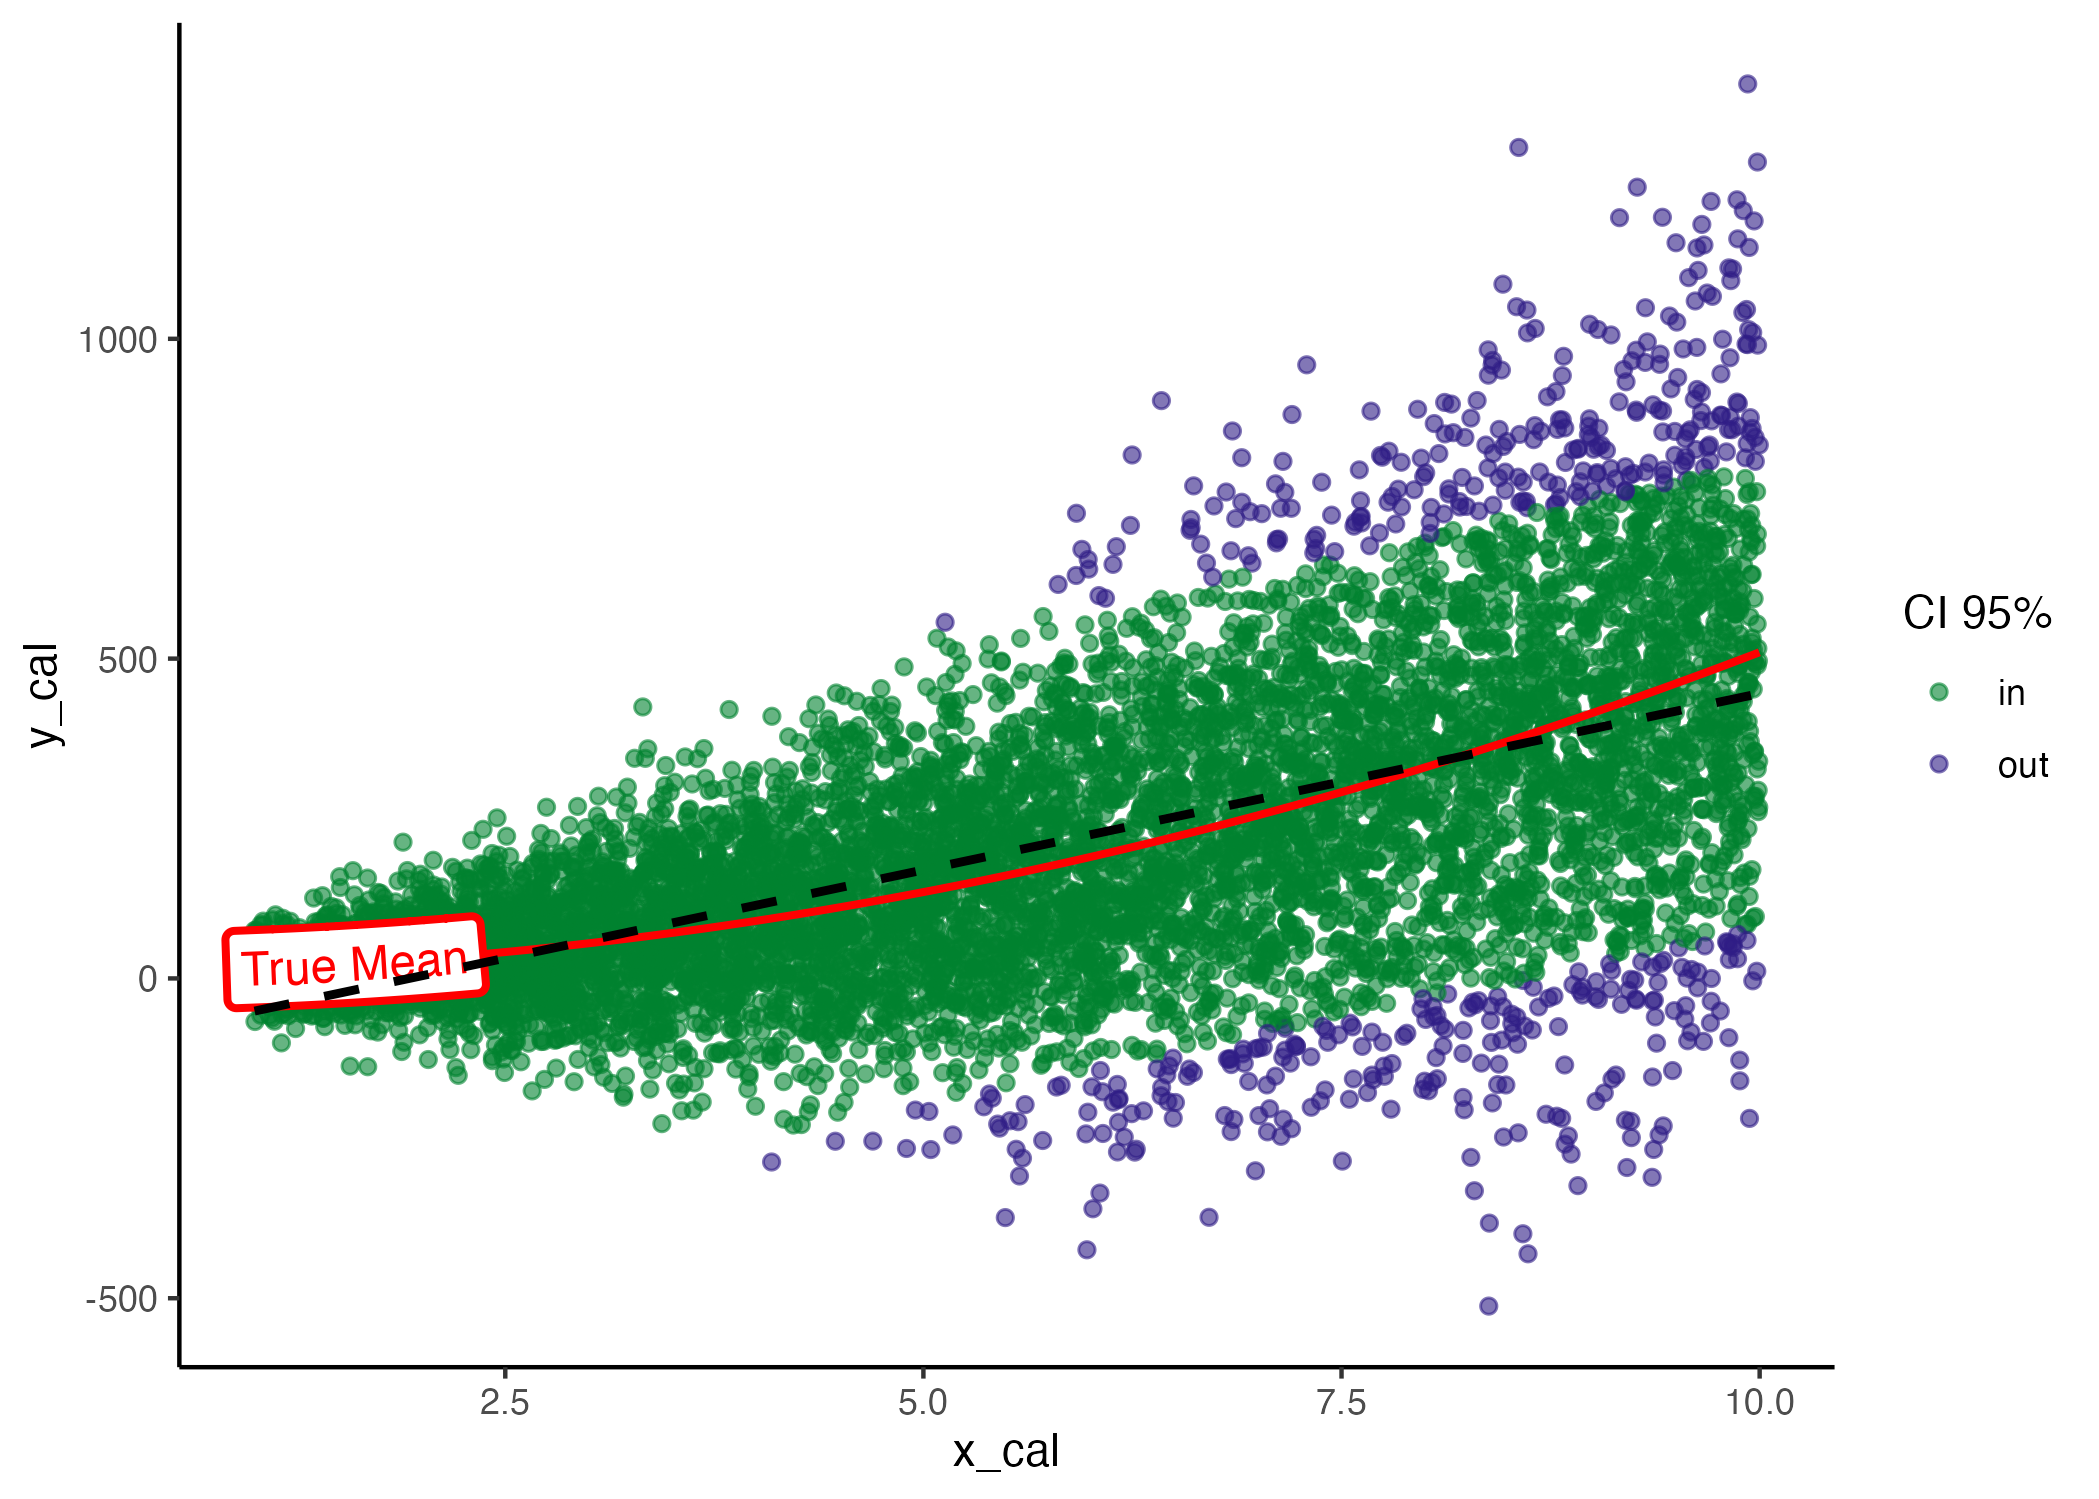 Model coverage, true mean (red) and estimated mean (black dashed line).